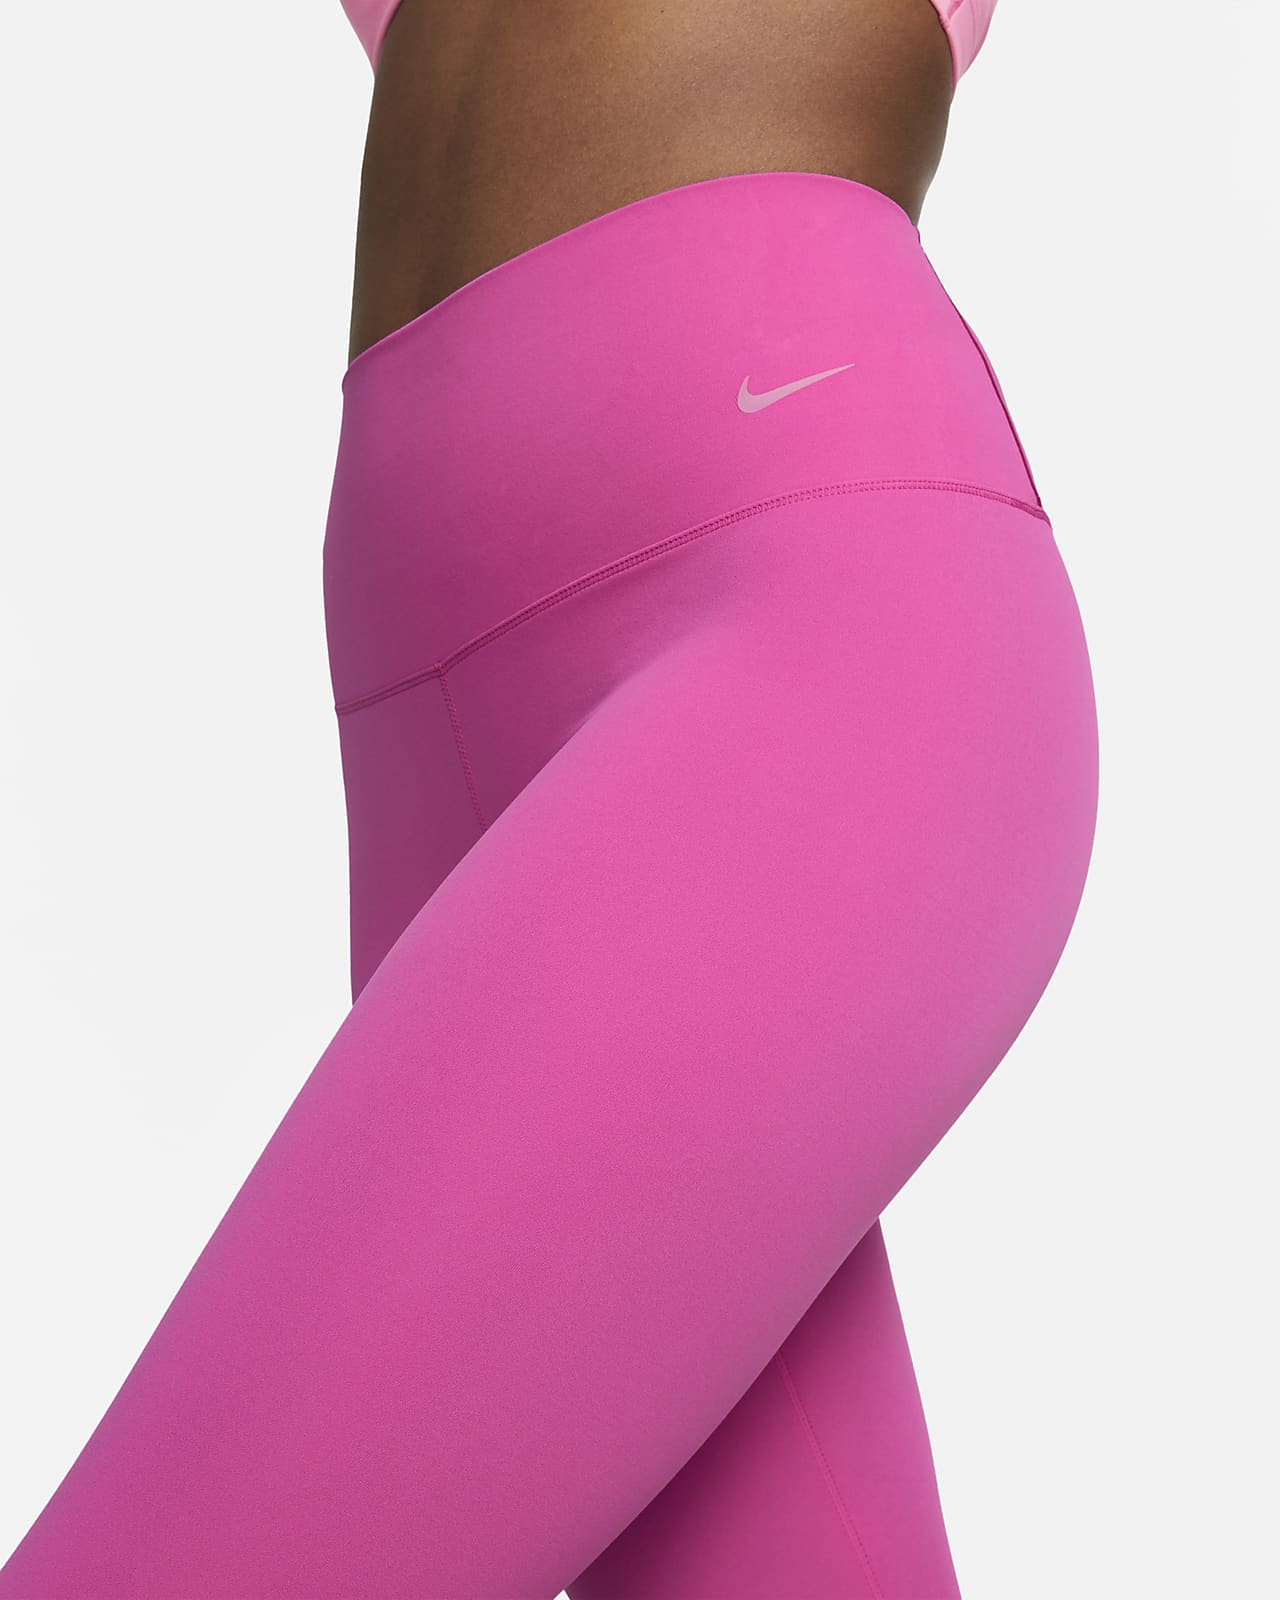 Red Dri-FIT Volleyball Tights & Leggings. Nike LU